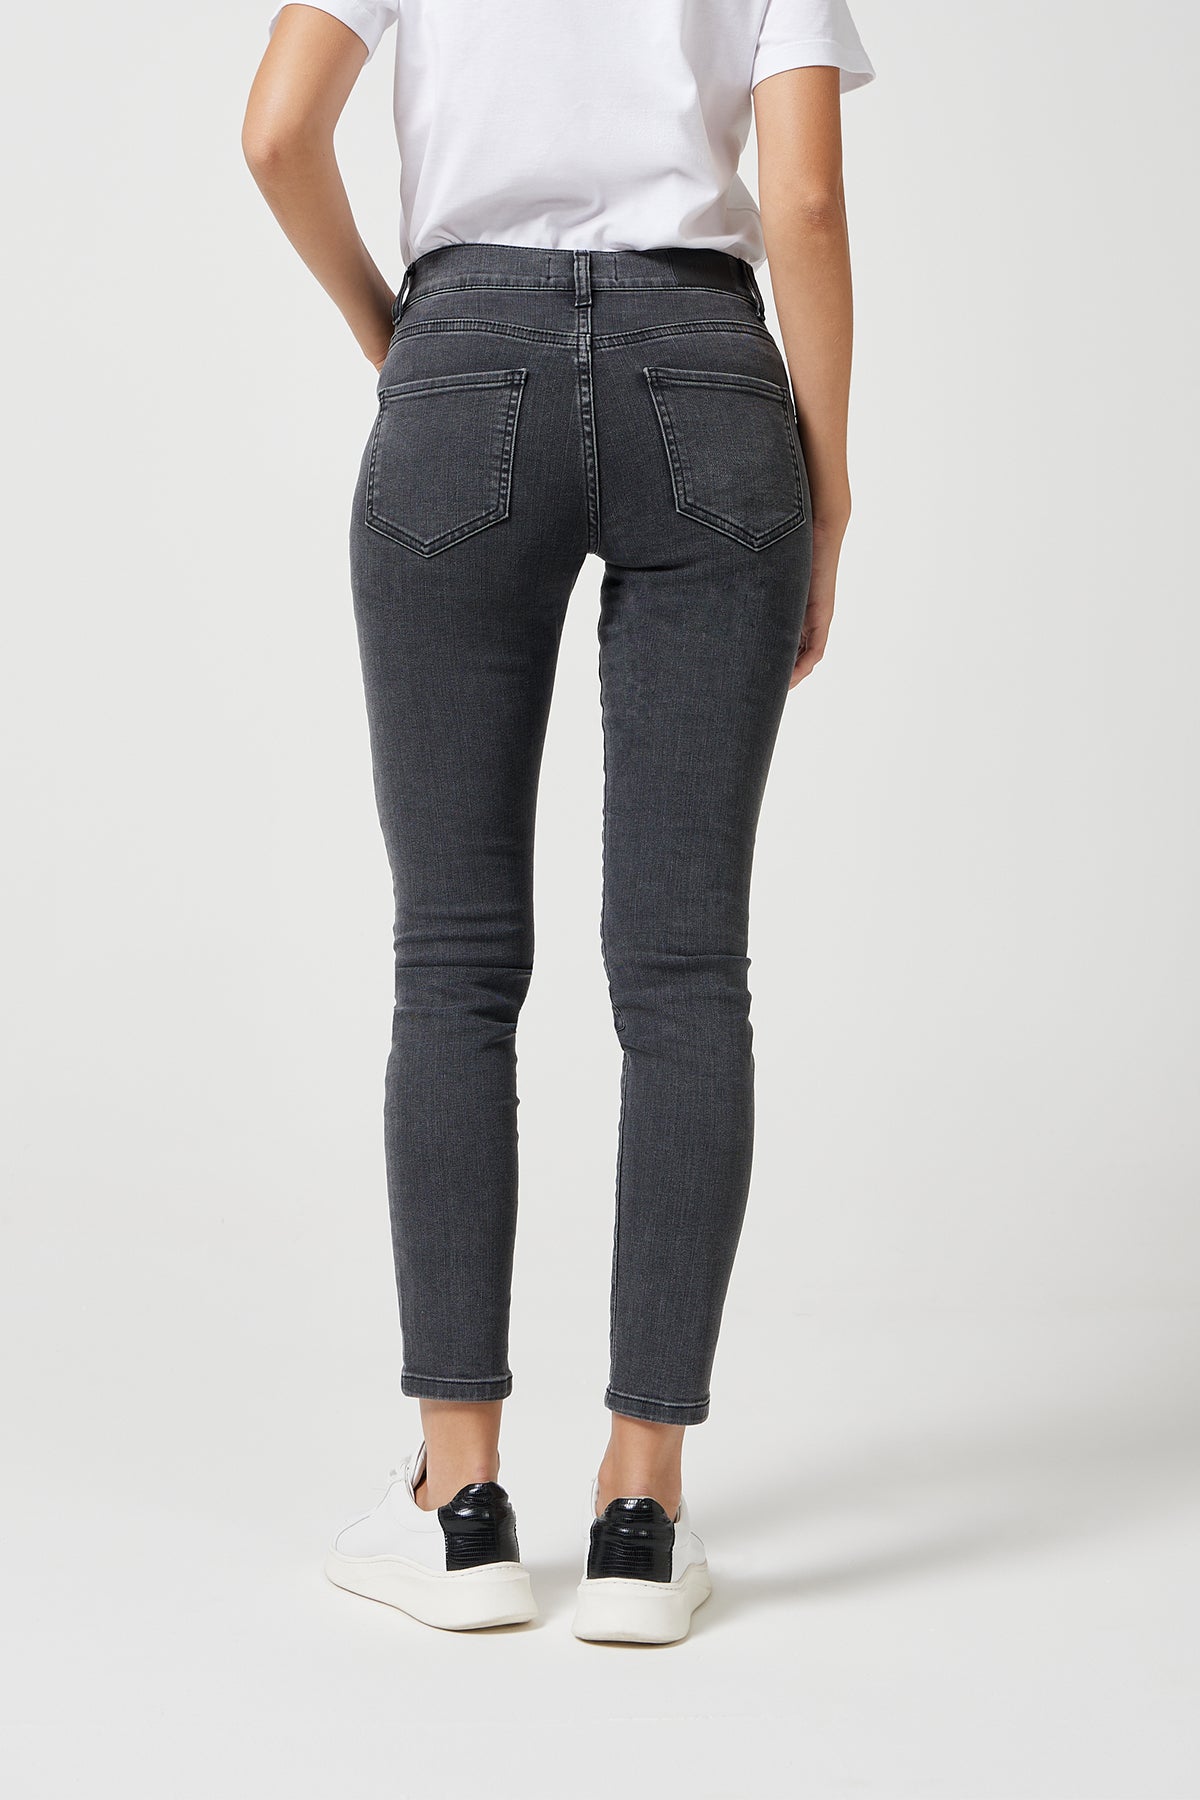 The Mid Rise Skinny Clean Grey